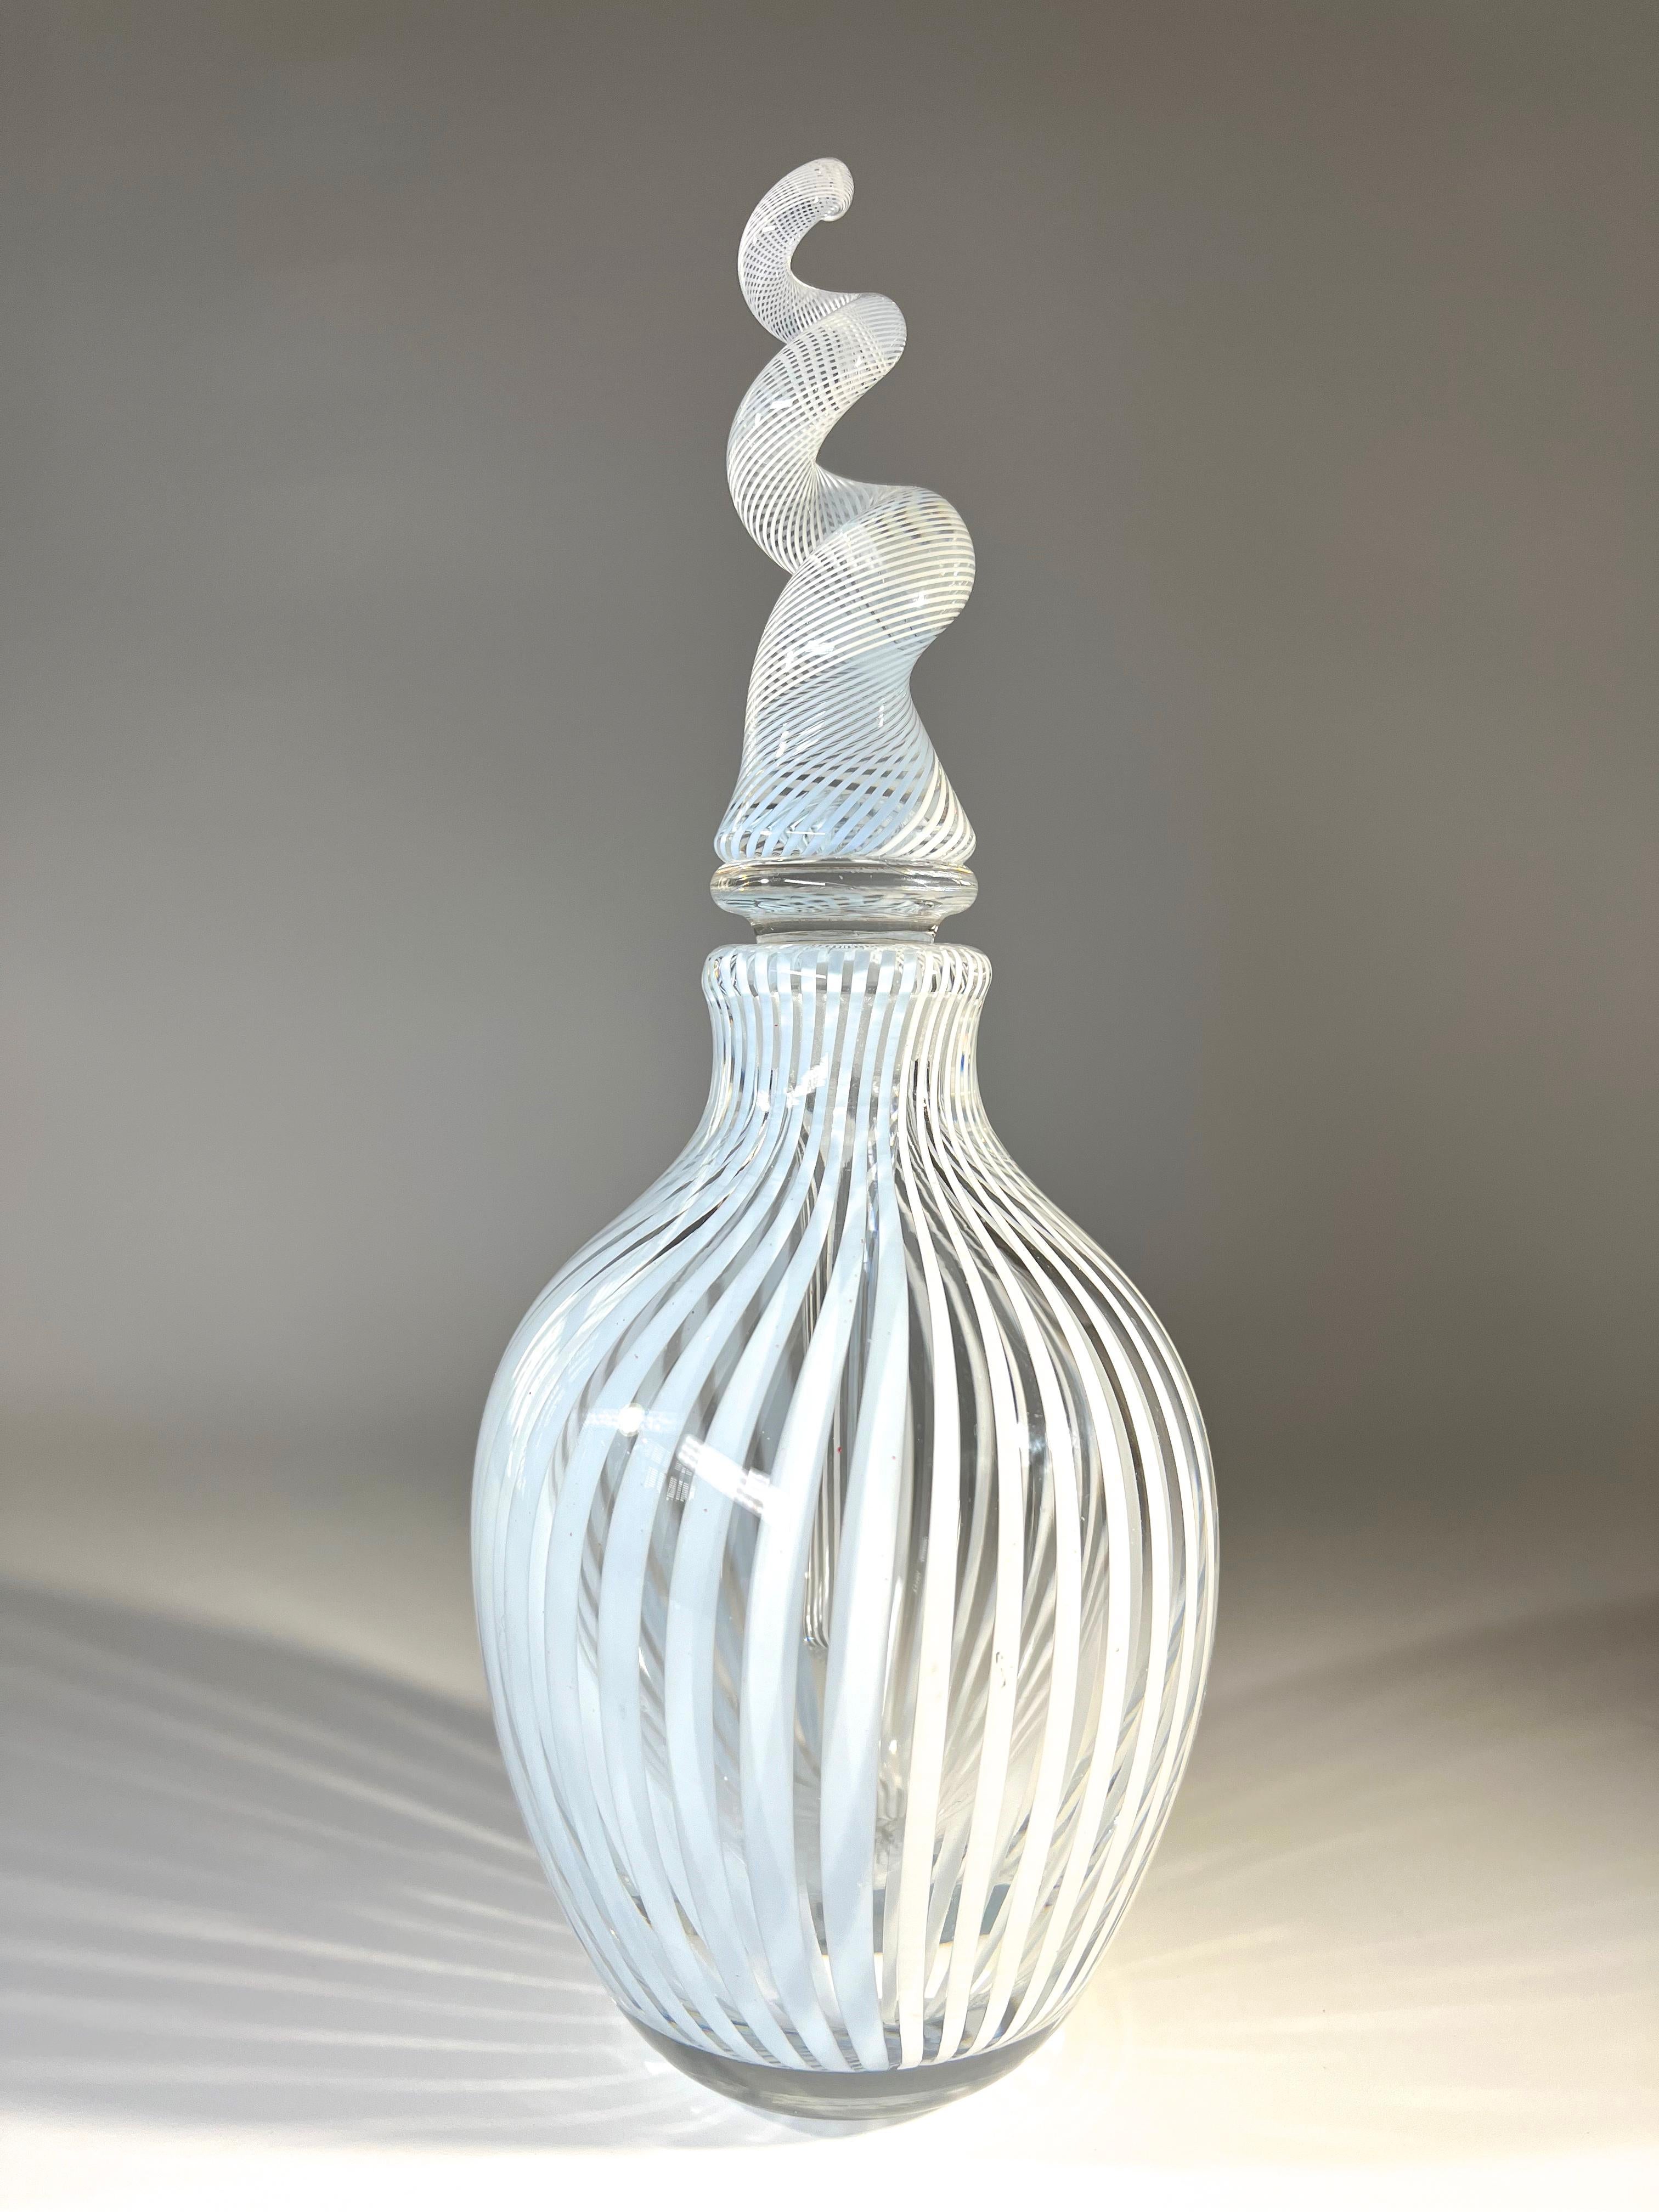 Harlequin white and the palest of blue stripes, decorate both this bottle and it's extraordinary spiral stopper
This is an exceptional piece from the renowned glass artist, Mike Hunter of Twists Studio in Scotland
Signature etched to base, has